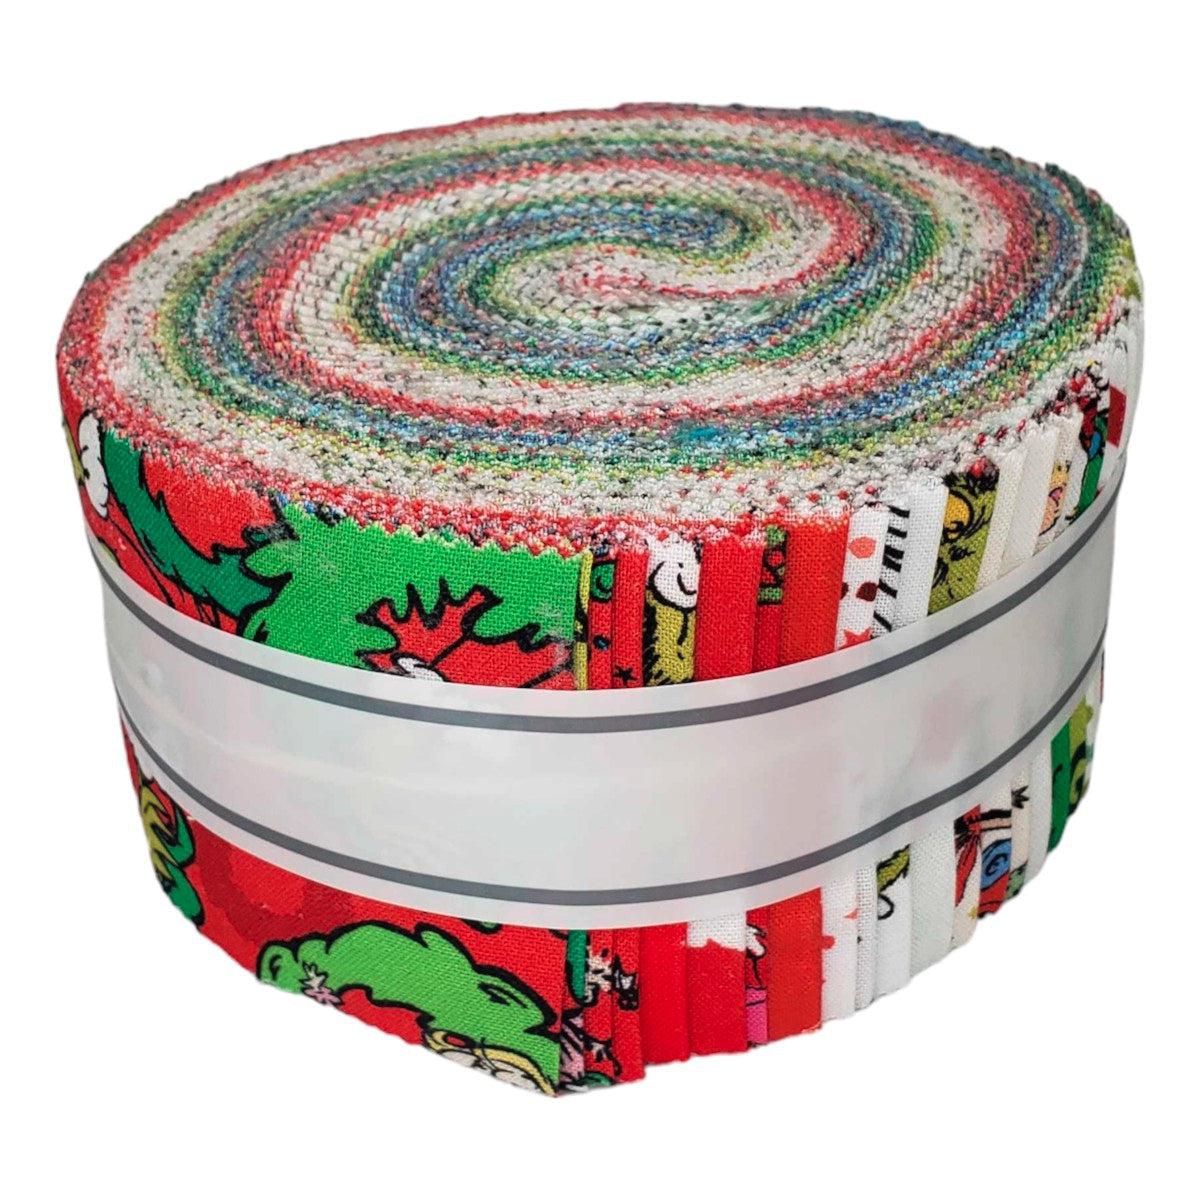 How The Grinch Stole Christmas Grinchmas Roll Up-Robert Kaufman-My Favorite Quilt Store